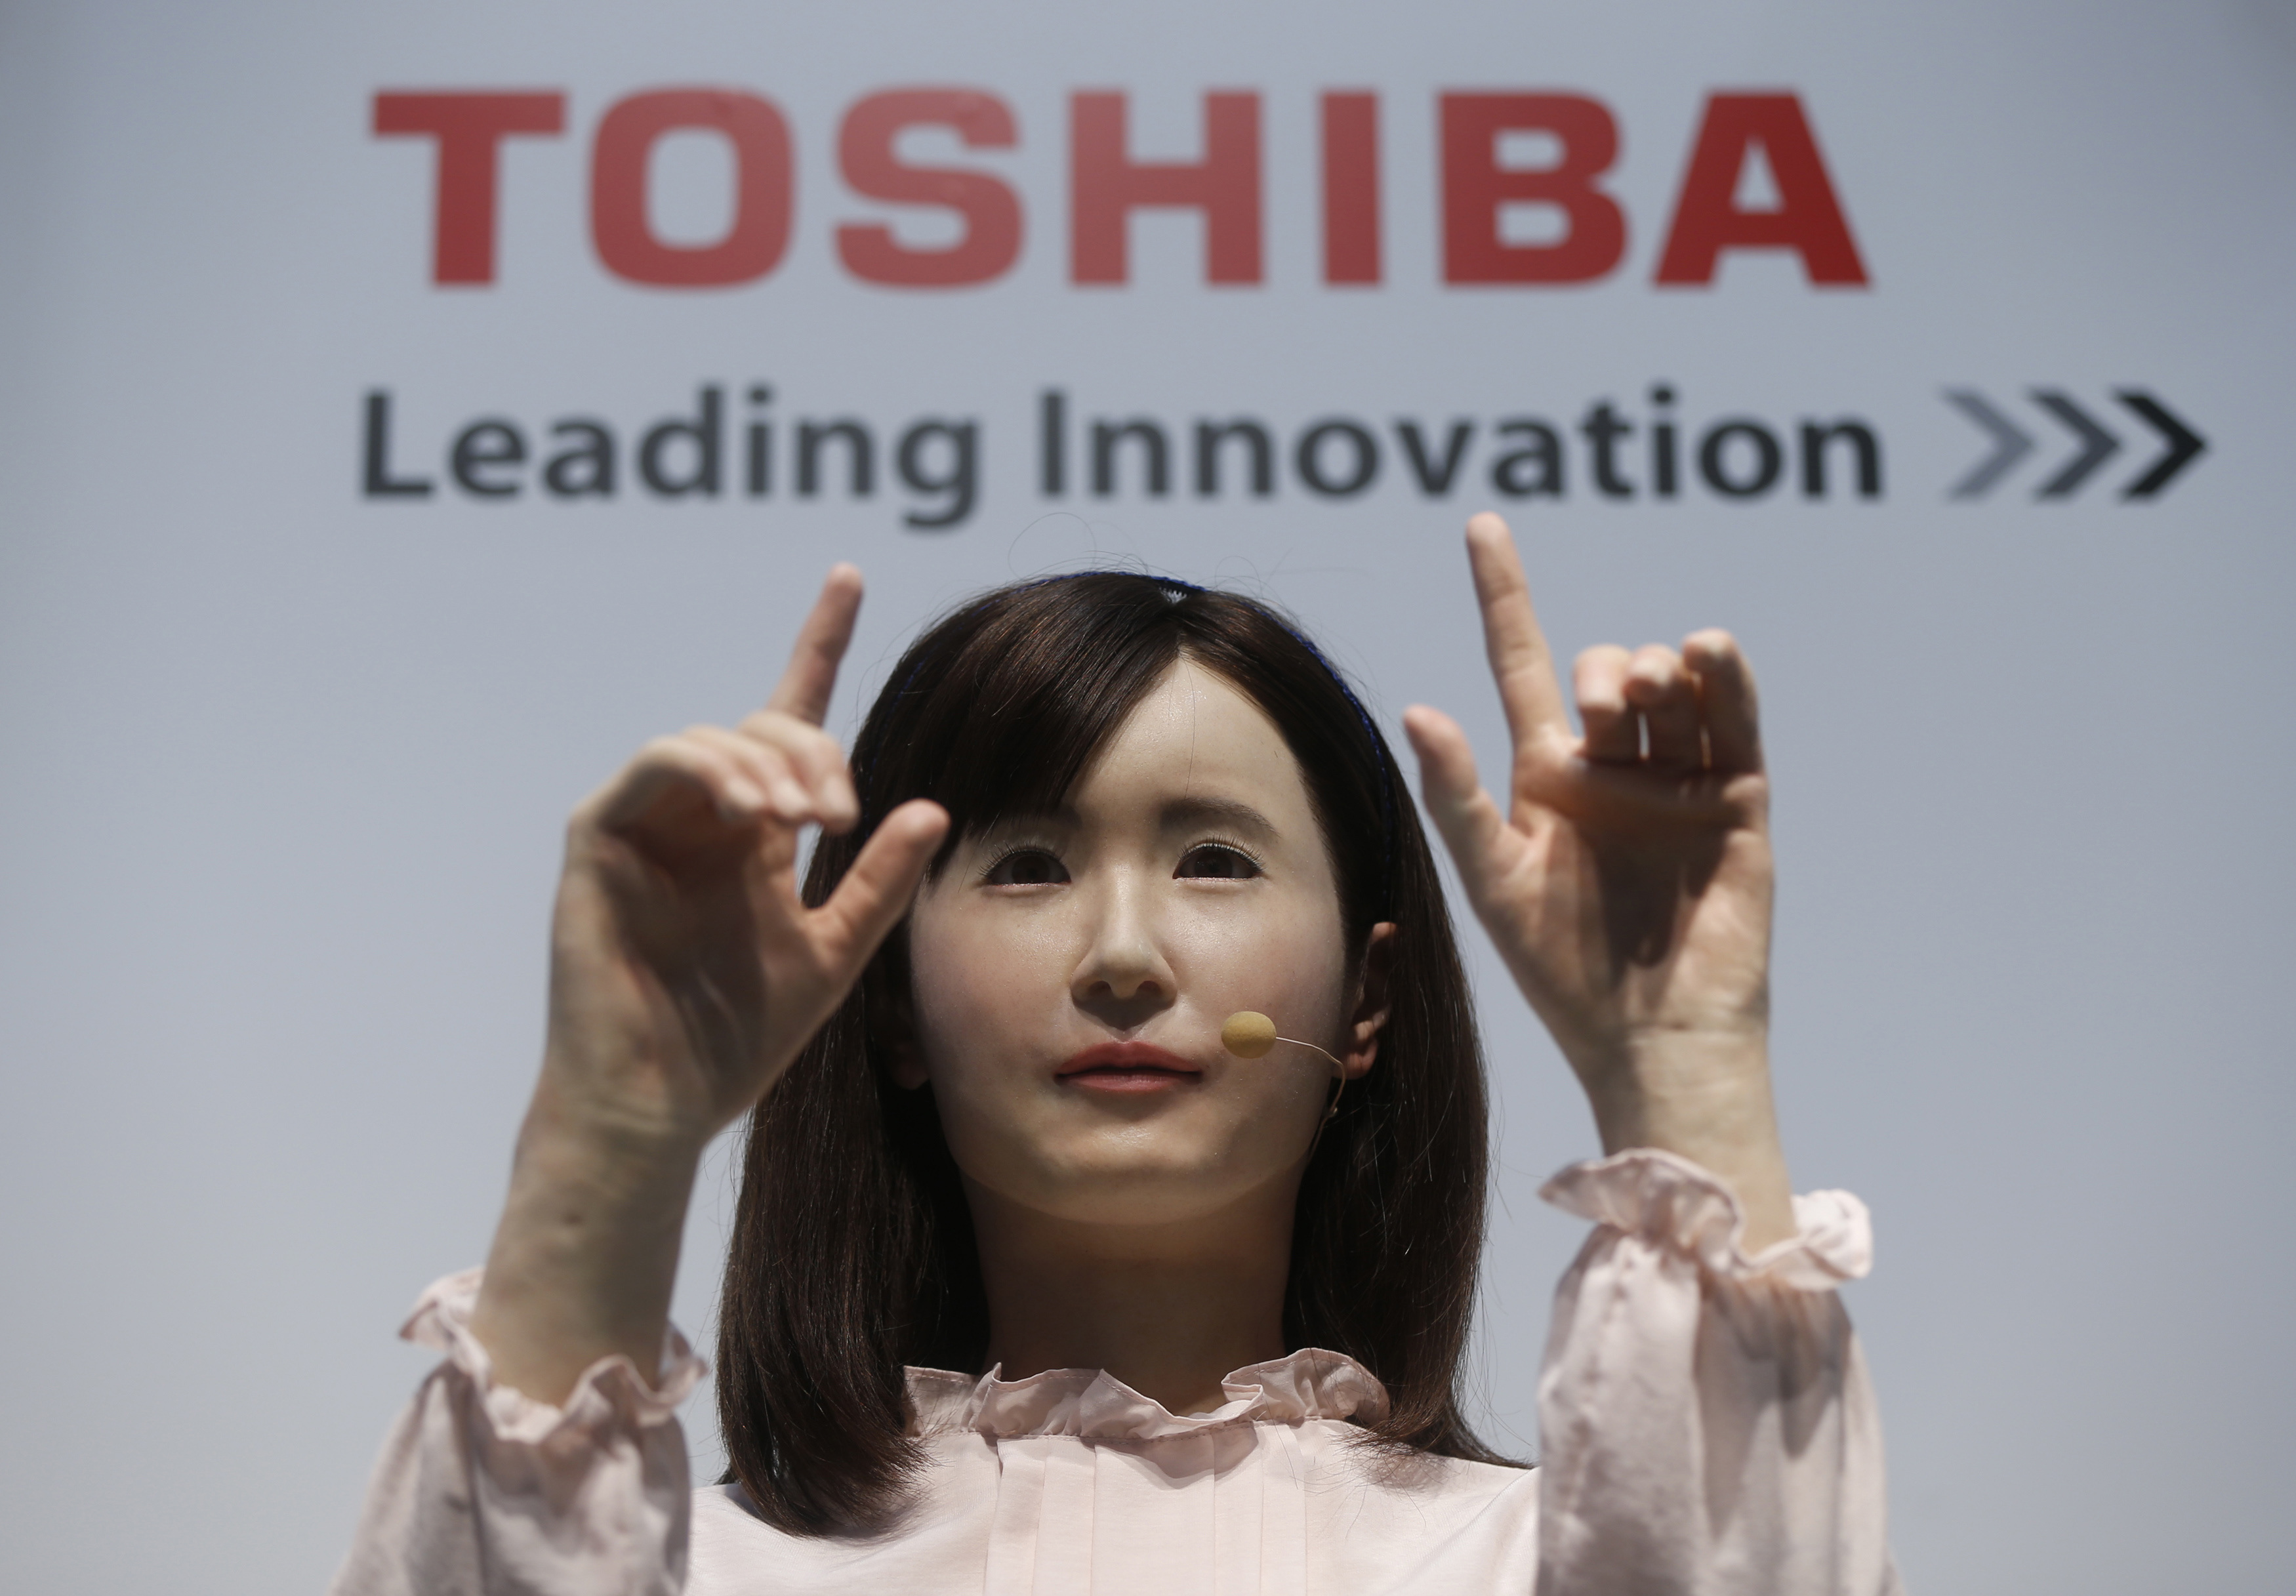 Toshiba Corp. demonstrates its communications android named Ms. Aiko Chihira that can use sign language and introduce itself, at CEATEC JAPAN 2014 in Chiba